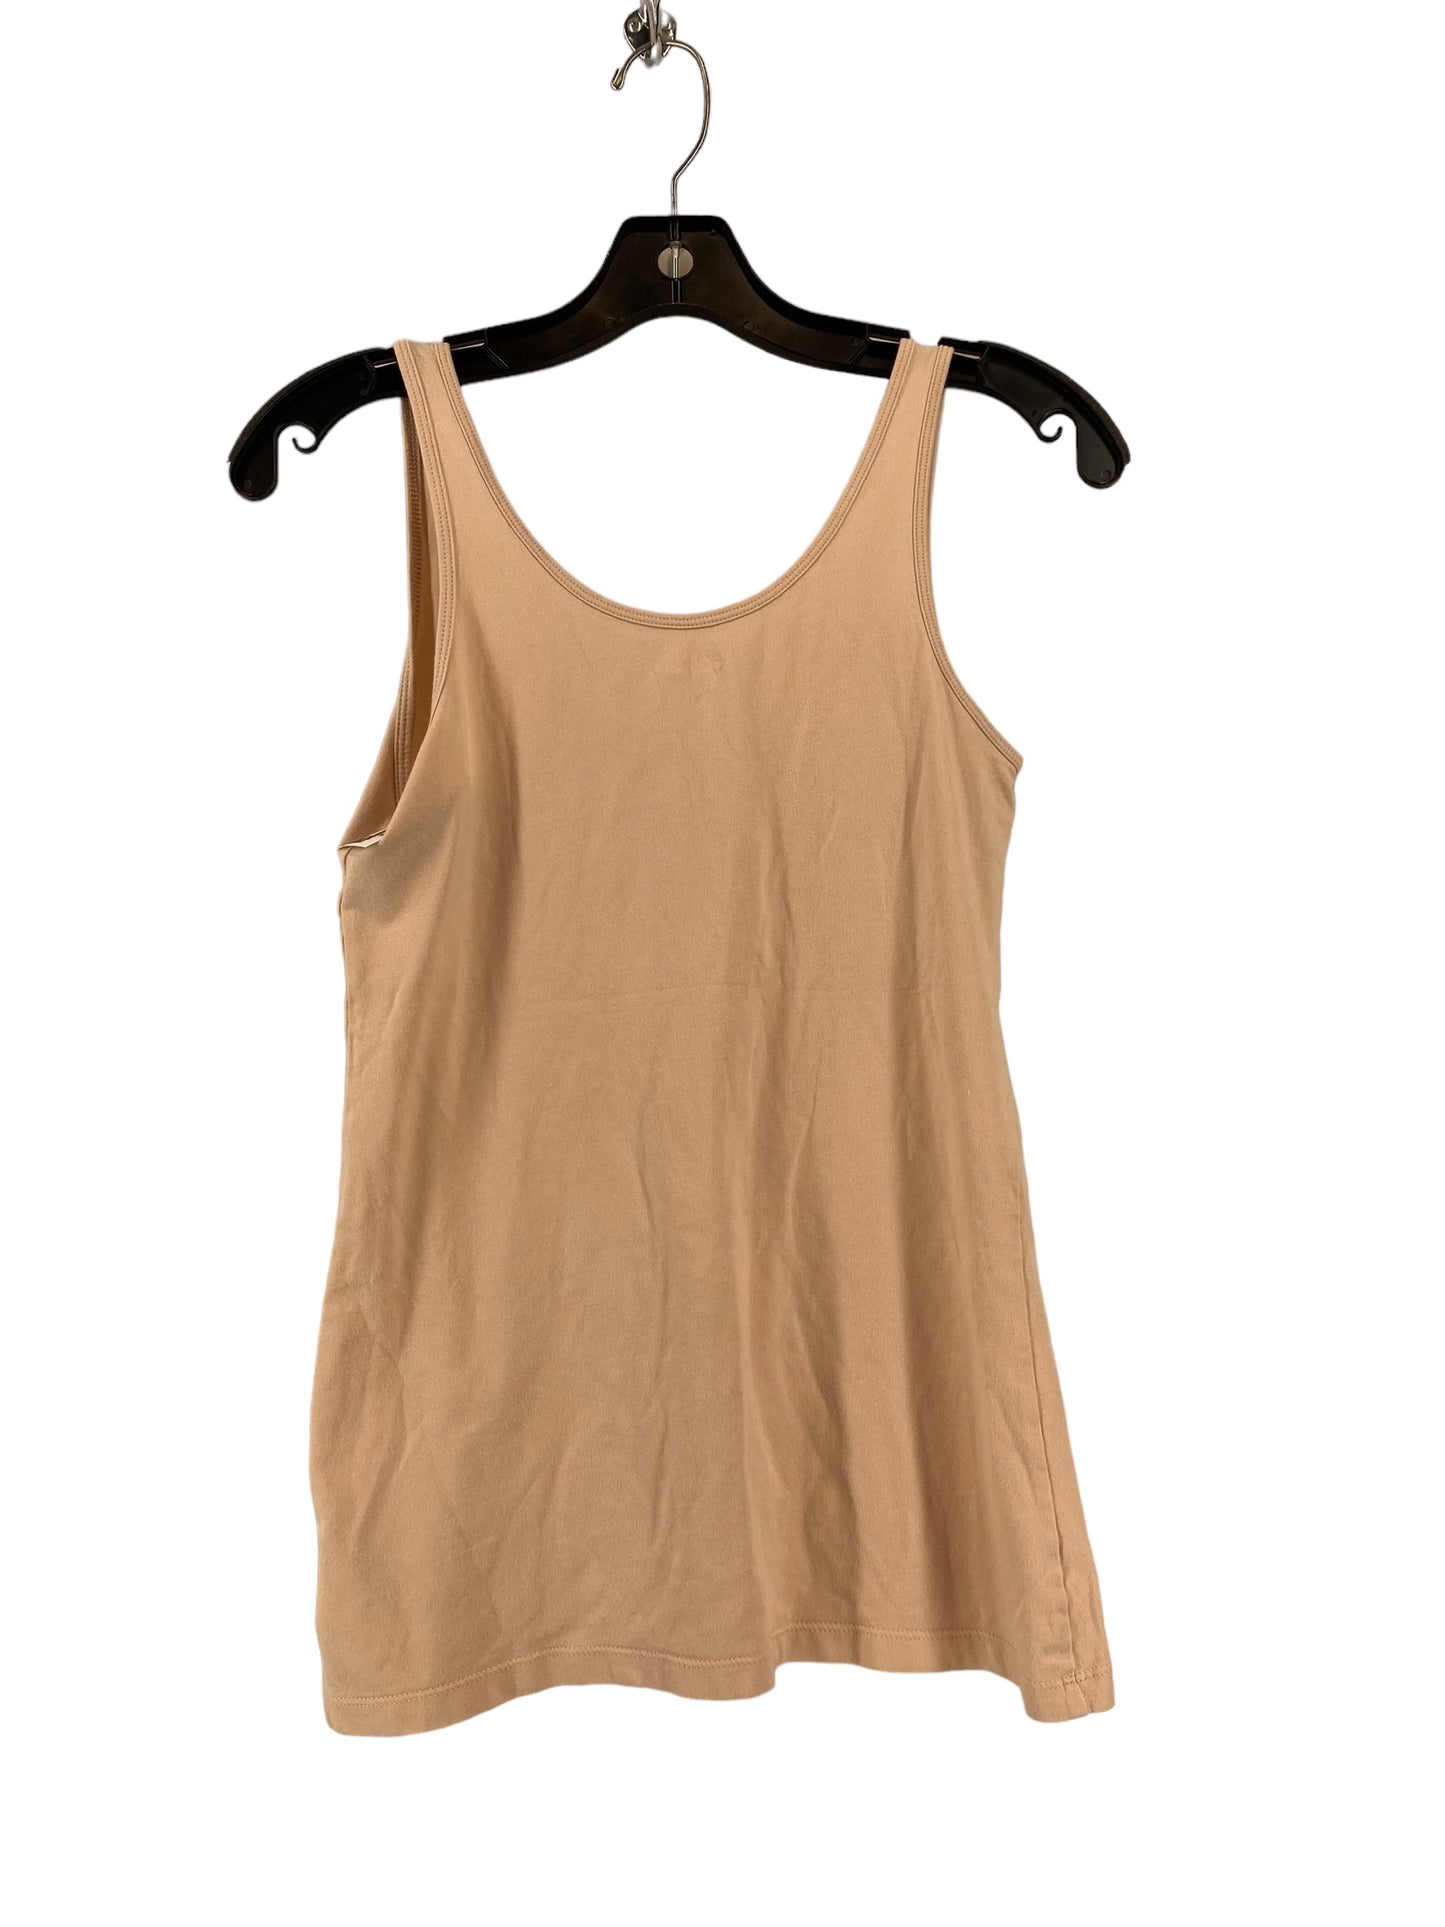 Ivory Top Sleeveless Old Navy, Size S